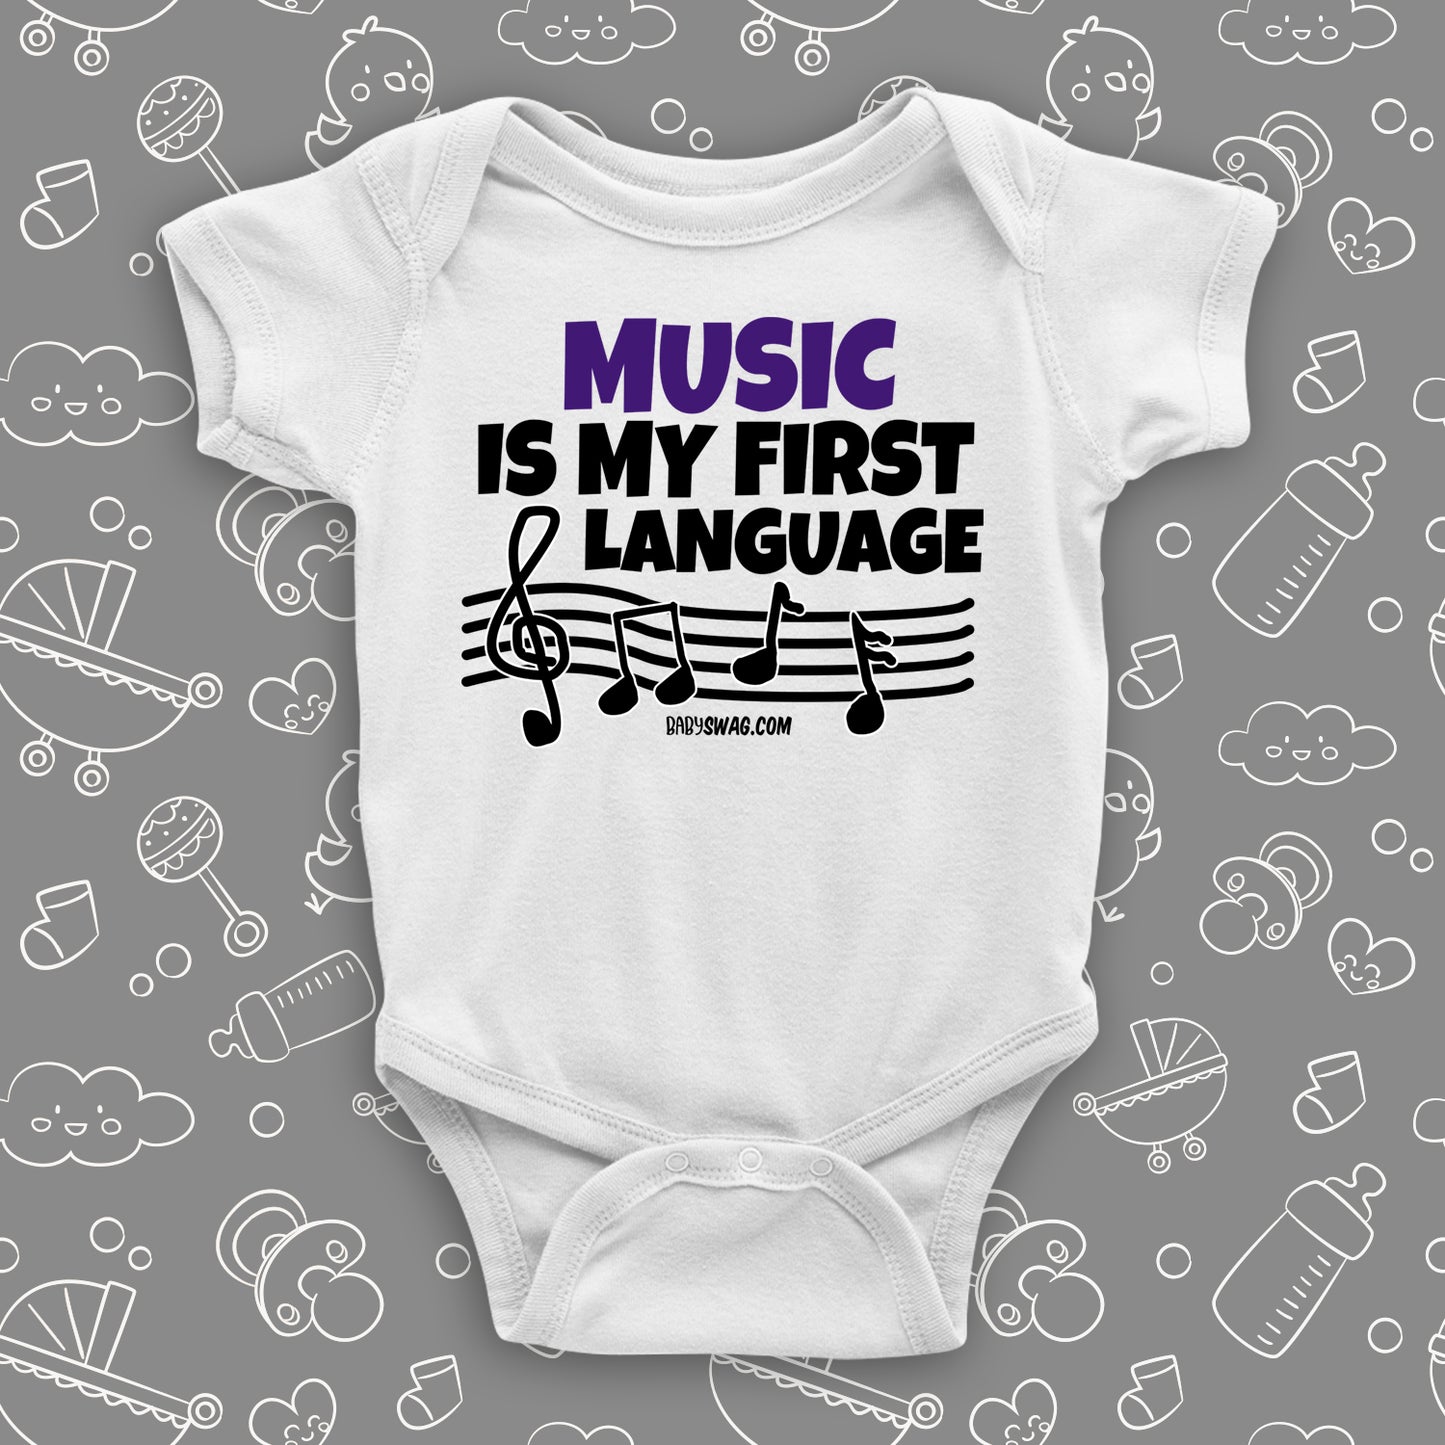 Cute baby onesies with saying "Music Is My First Language" in white.